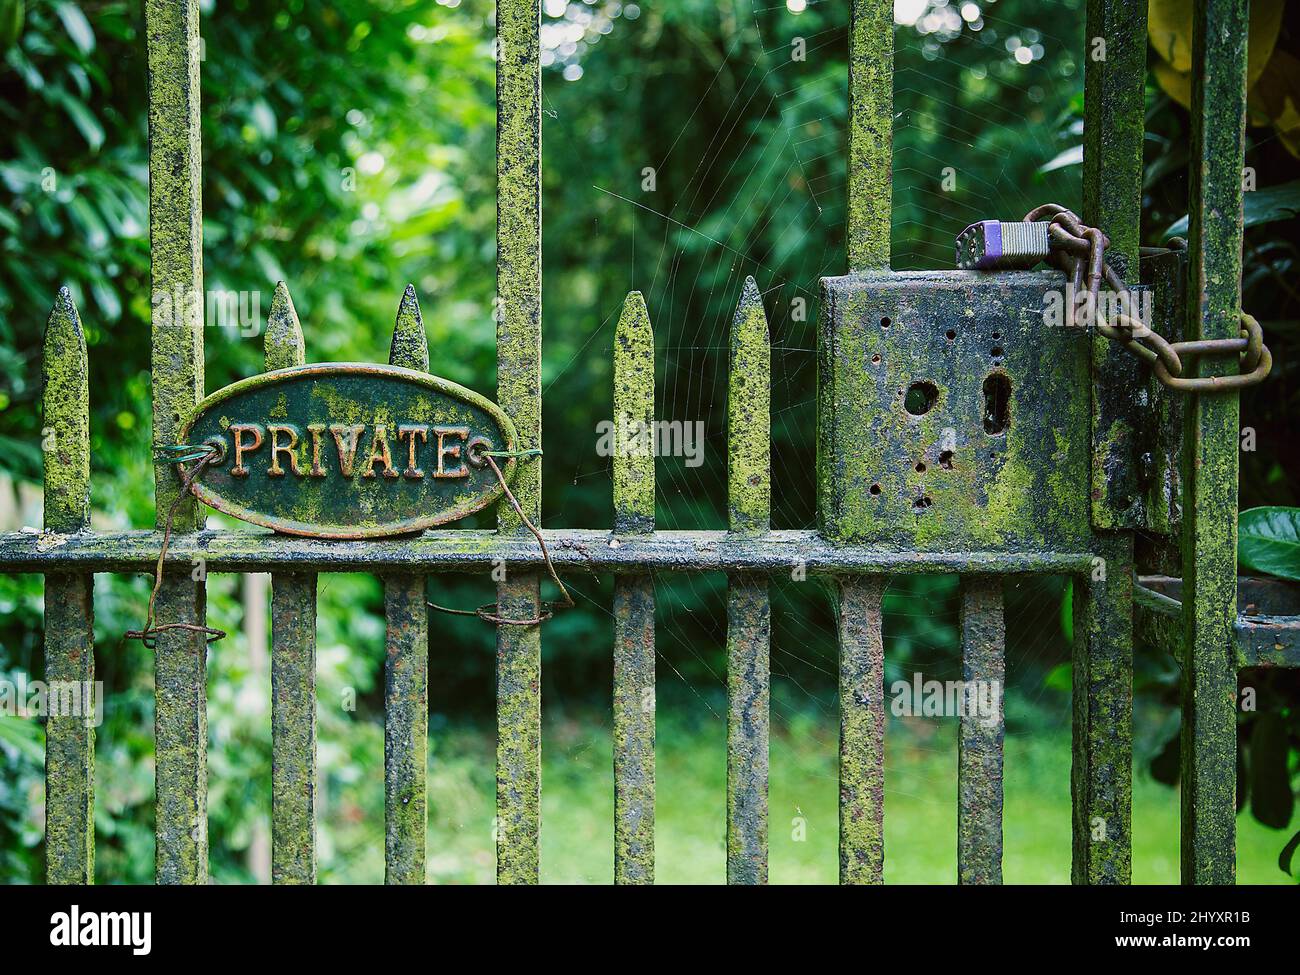 A spooky rusted iron gate with the word private on a plaque, locked closed and secured with a padlock and chain. Stock Photo